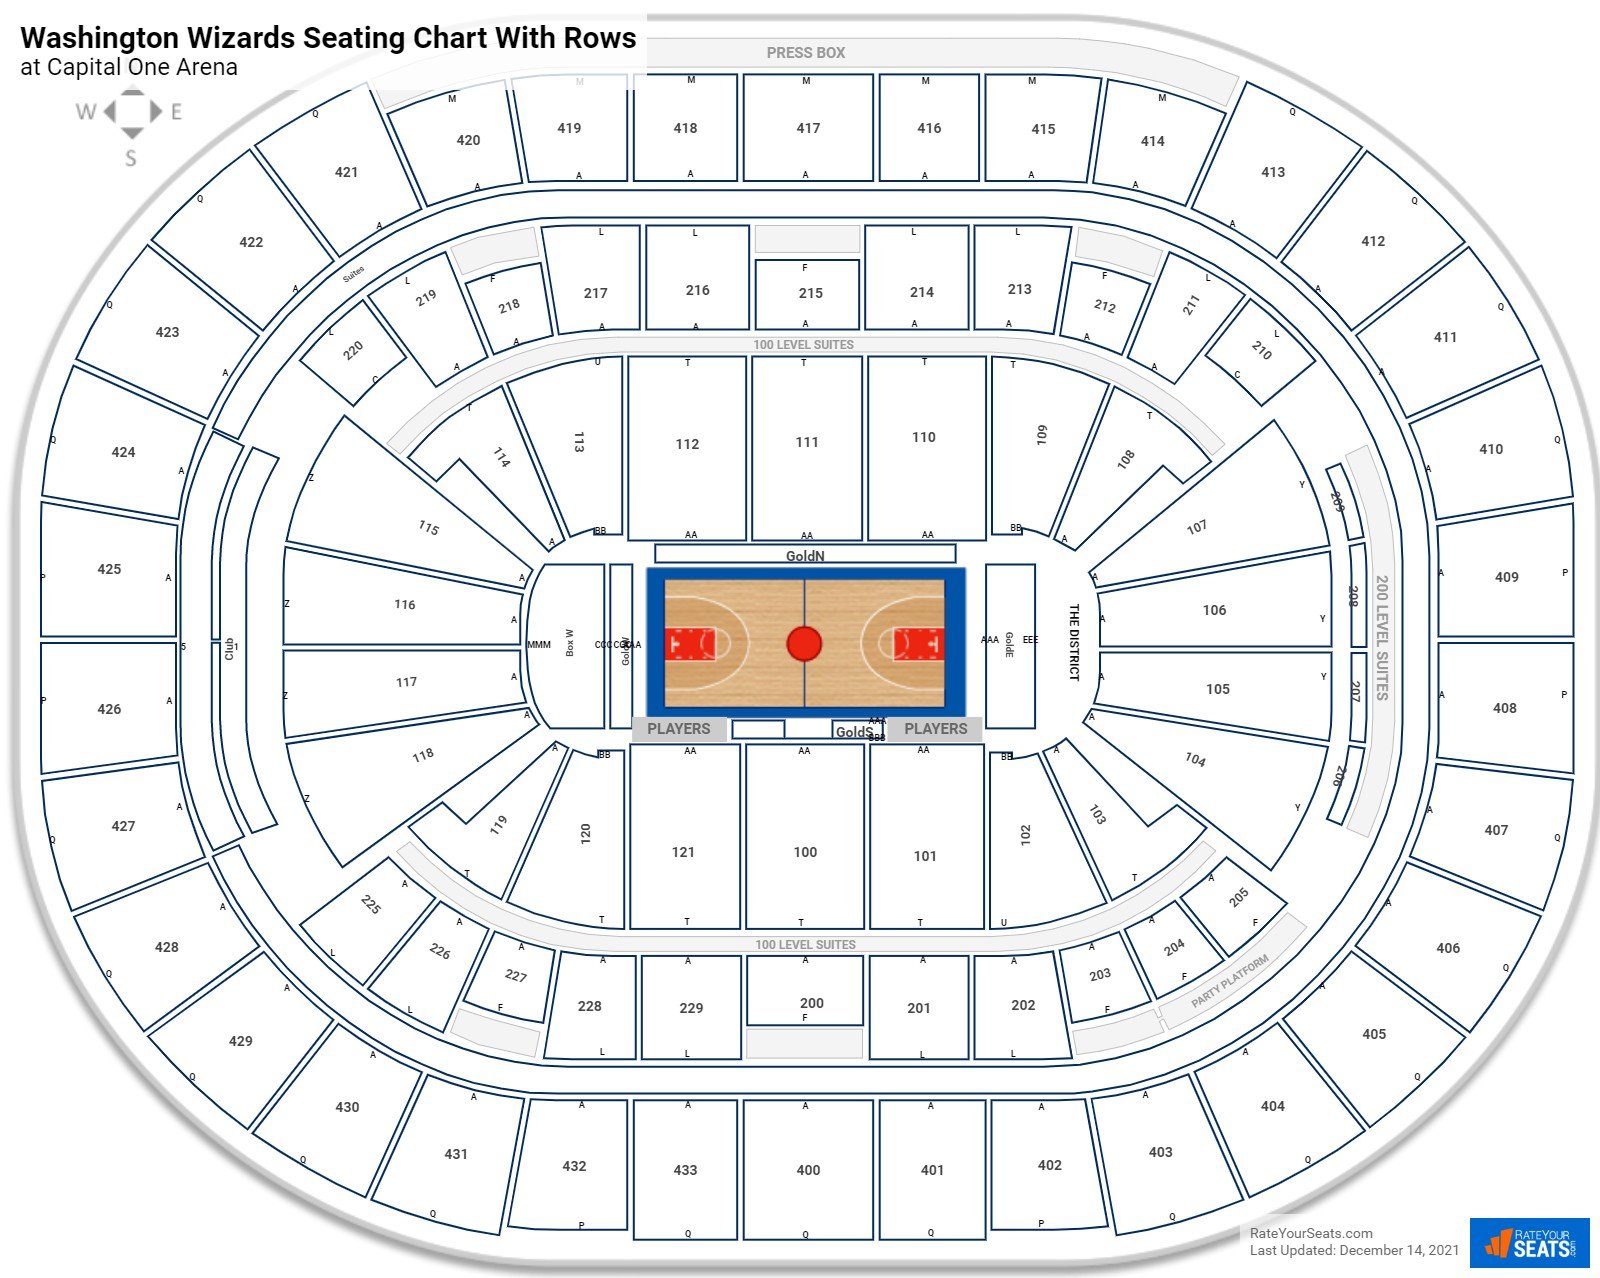 Washington Wizards Seating Chart With Rows At Capital One Arena 